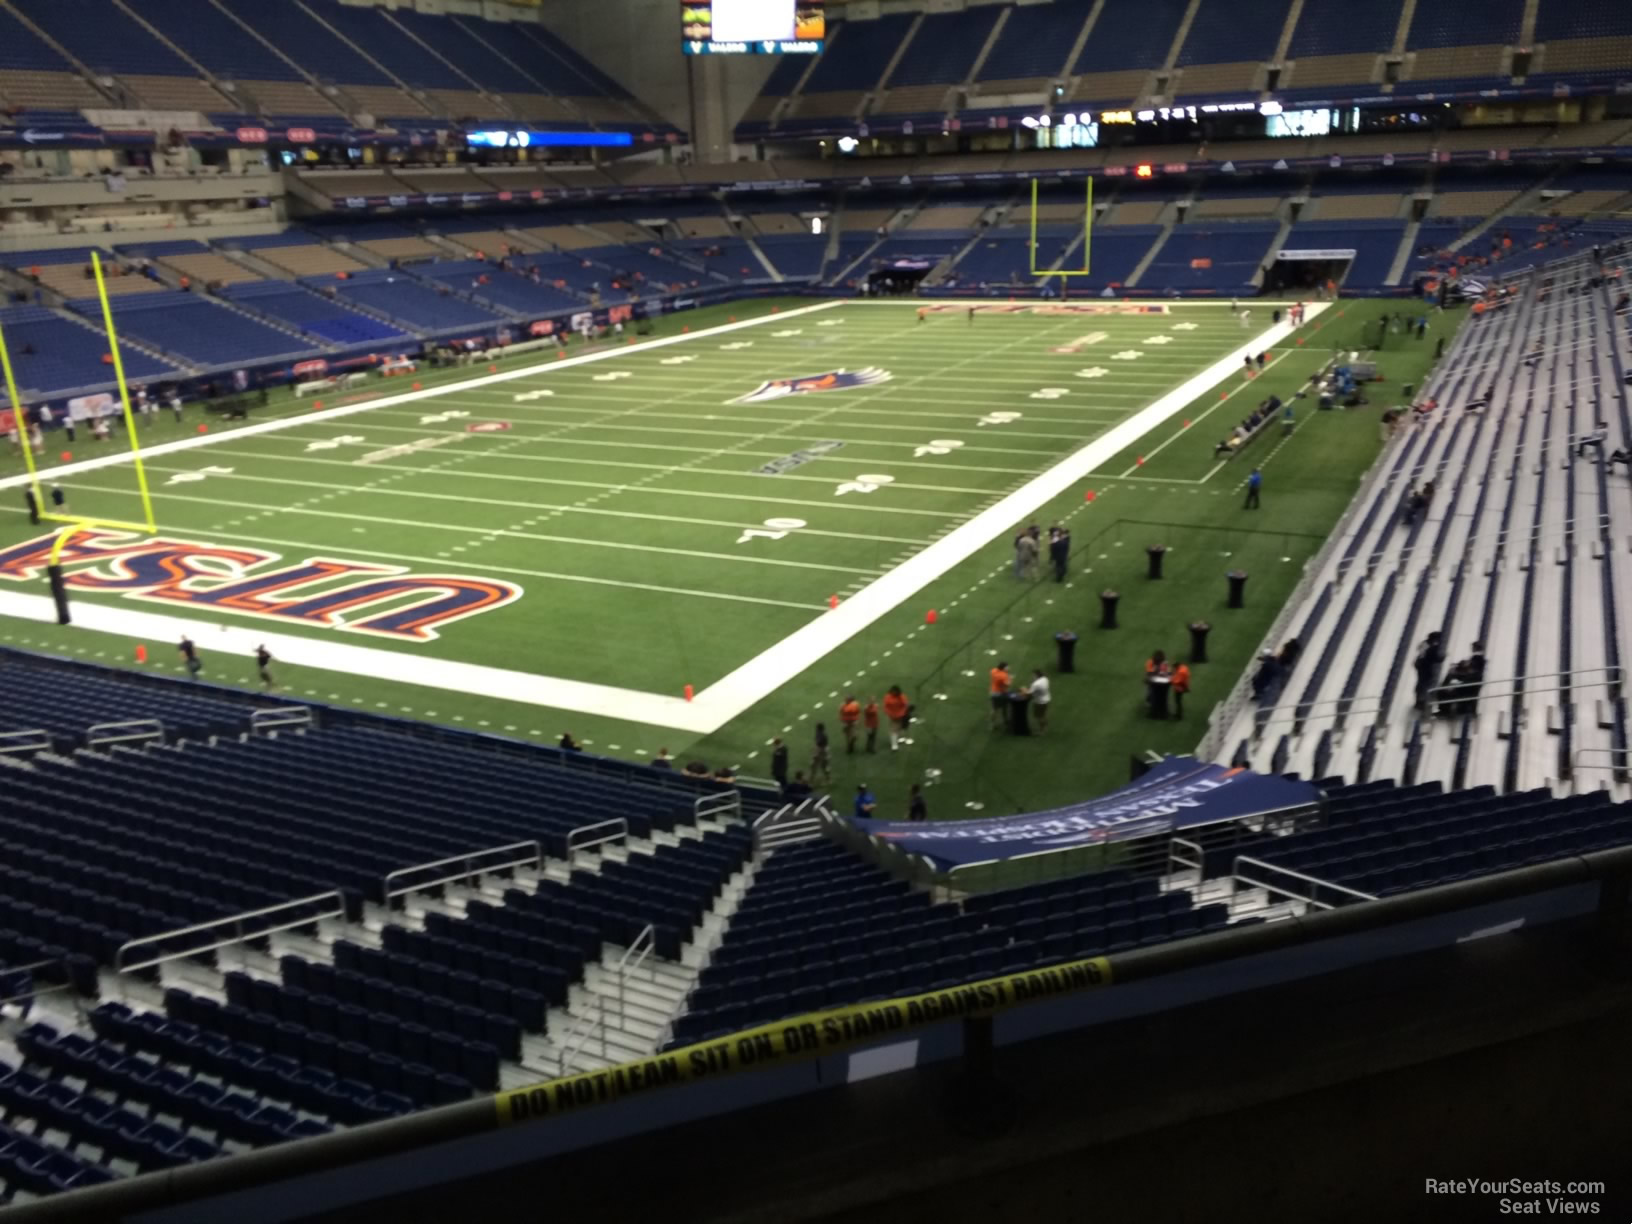 section 241, row 5 seat view  for football - alamodome